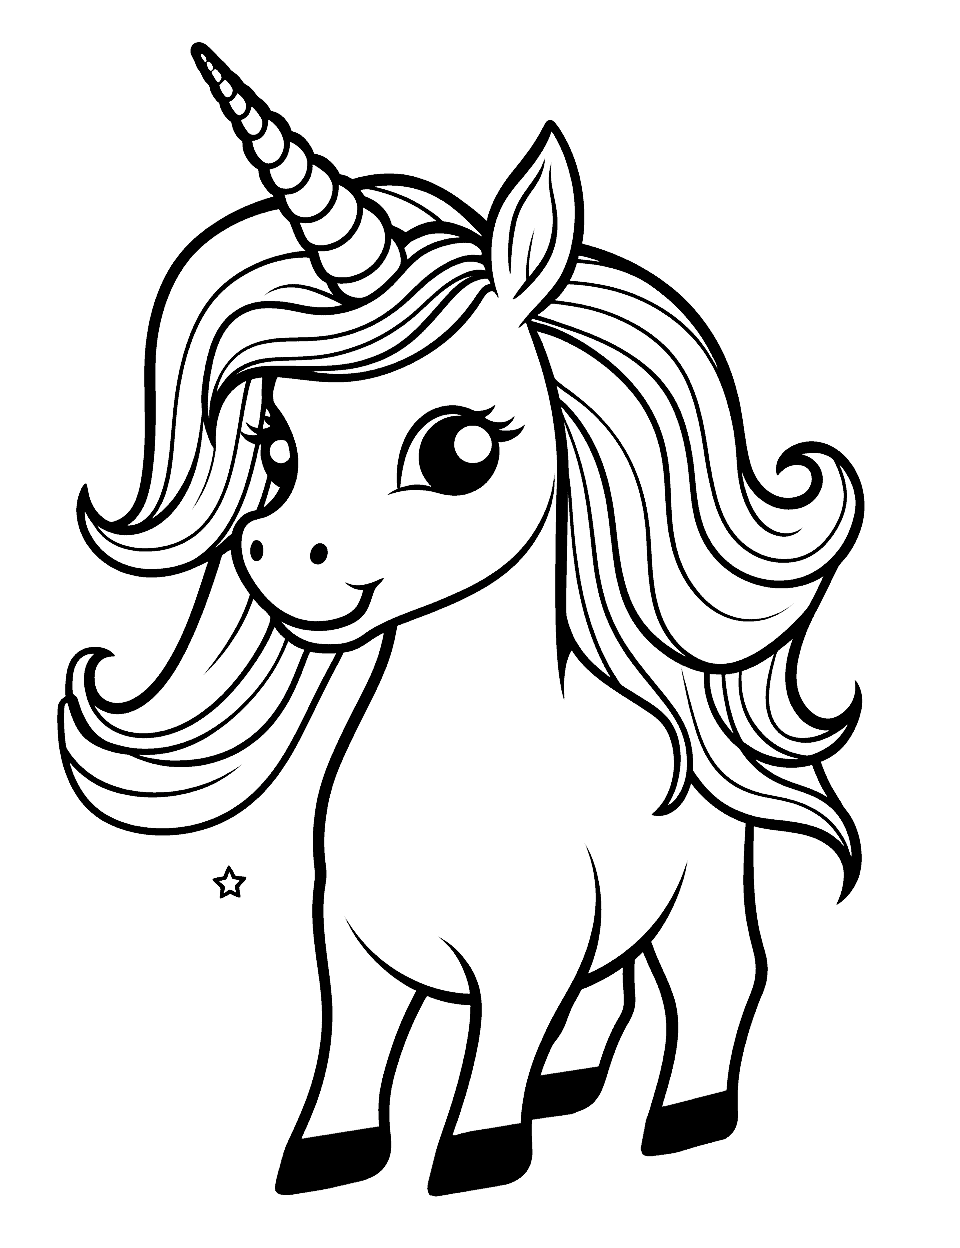 Regal Unicorn Coloring Page - A unicorn design with exaggerated features and a bright, rainbow mane.